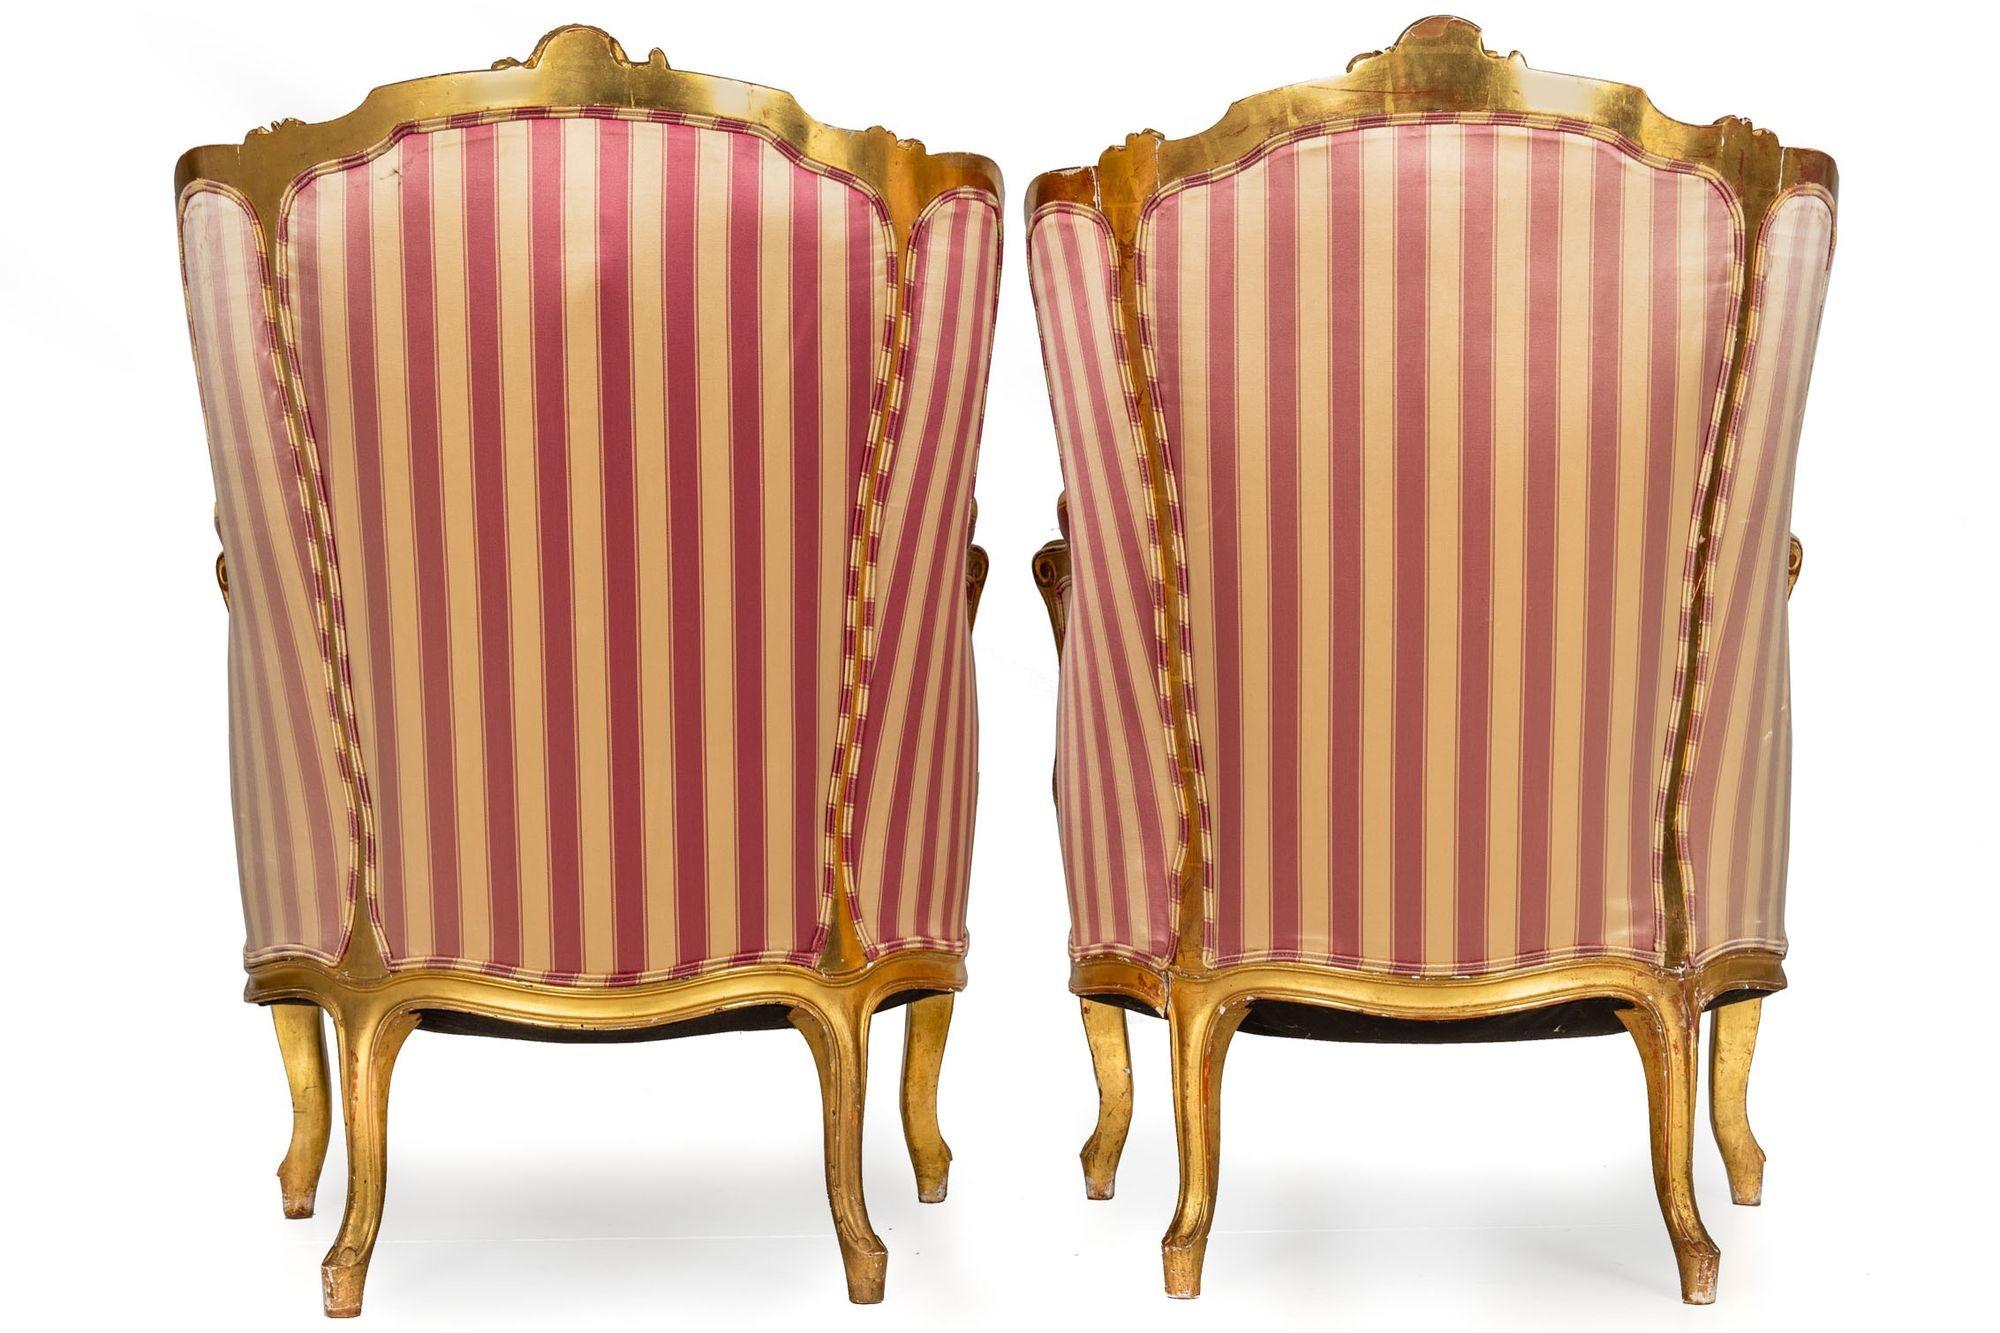 Rococo Revival Pair of Louis XV Style Carved Giltwood Arm Chairs circa 1860